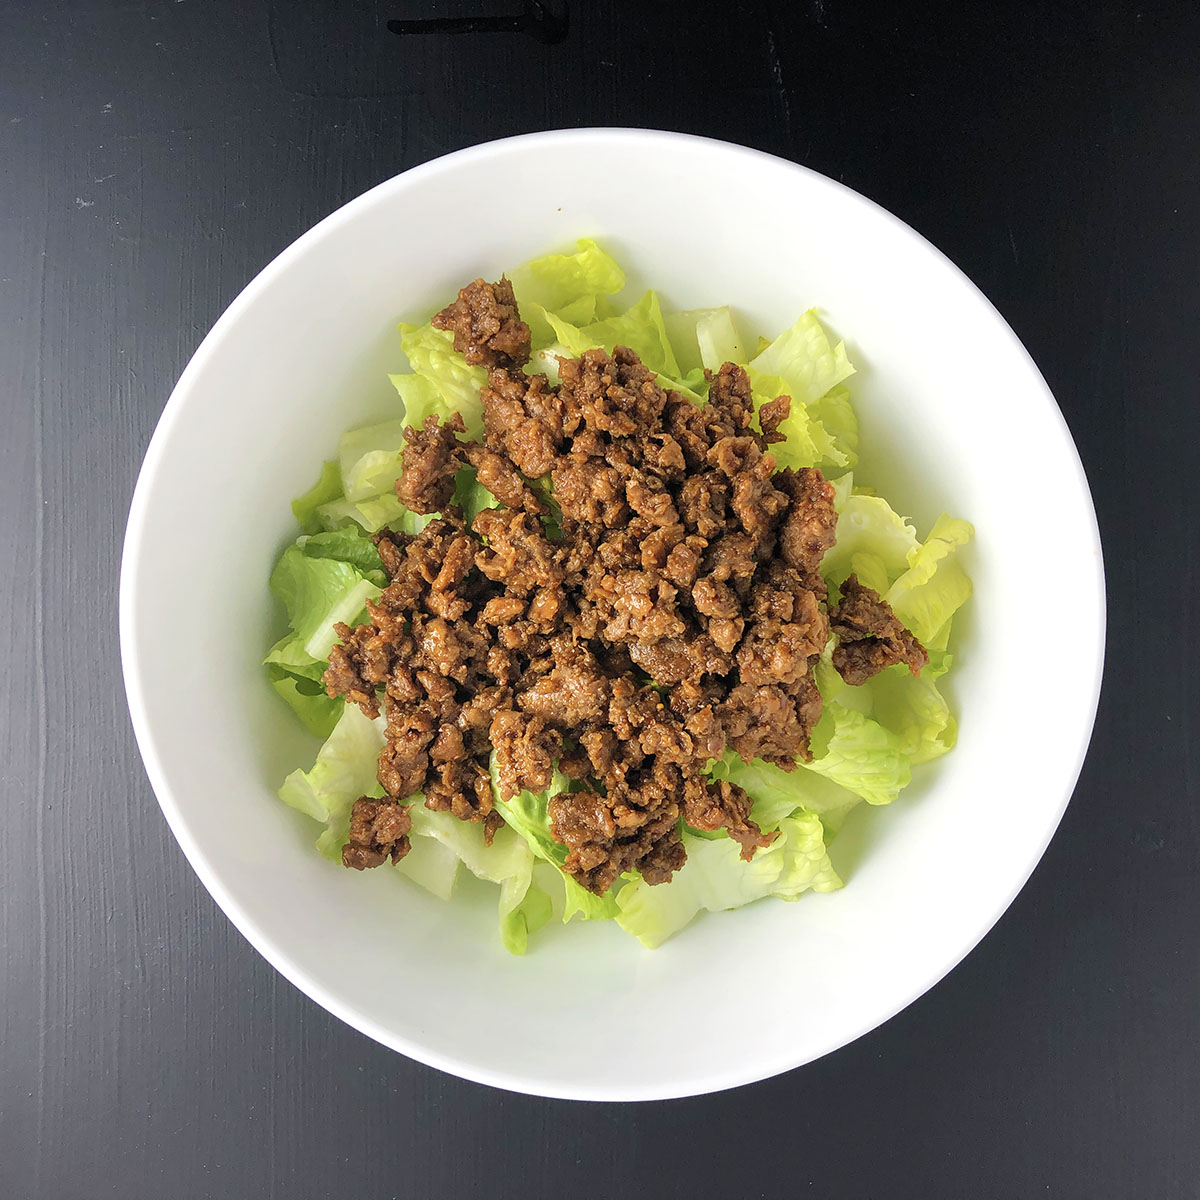 Top-down shot of chopped romaine lettuce and Beyond Beef Taco meat mix in a white bowl, against a black background. Prep step number 2 for making Beyond Beef Taco Salad